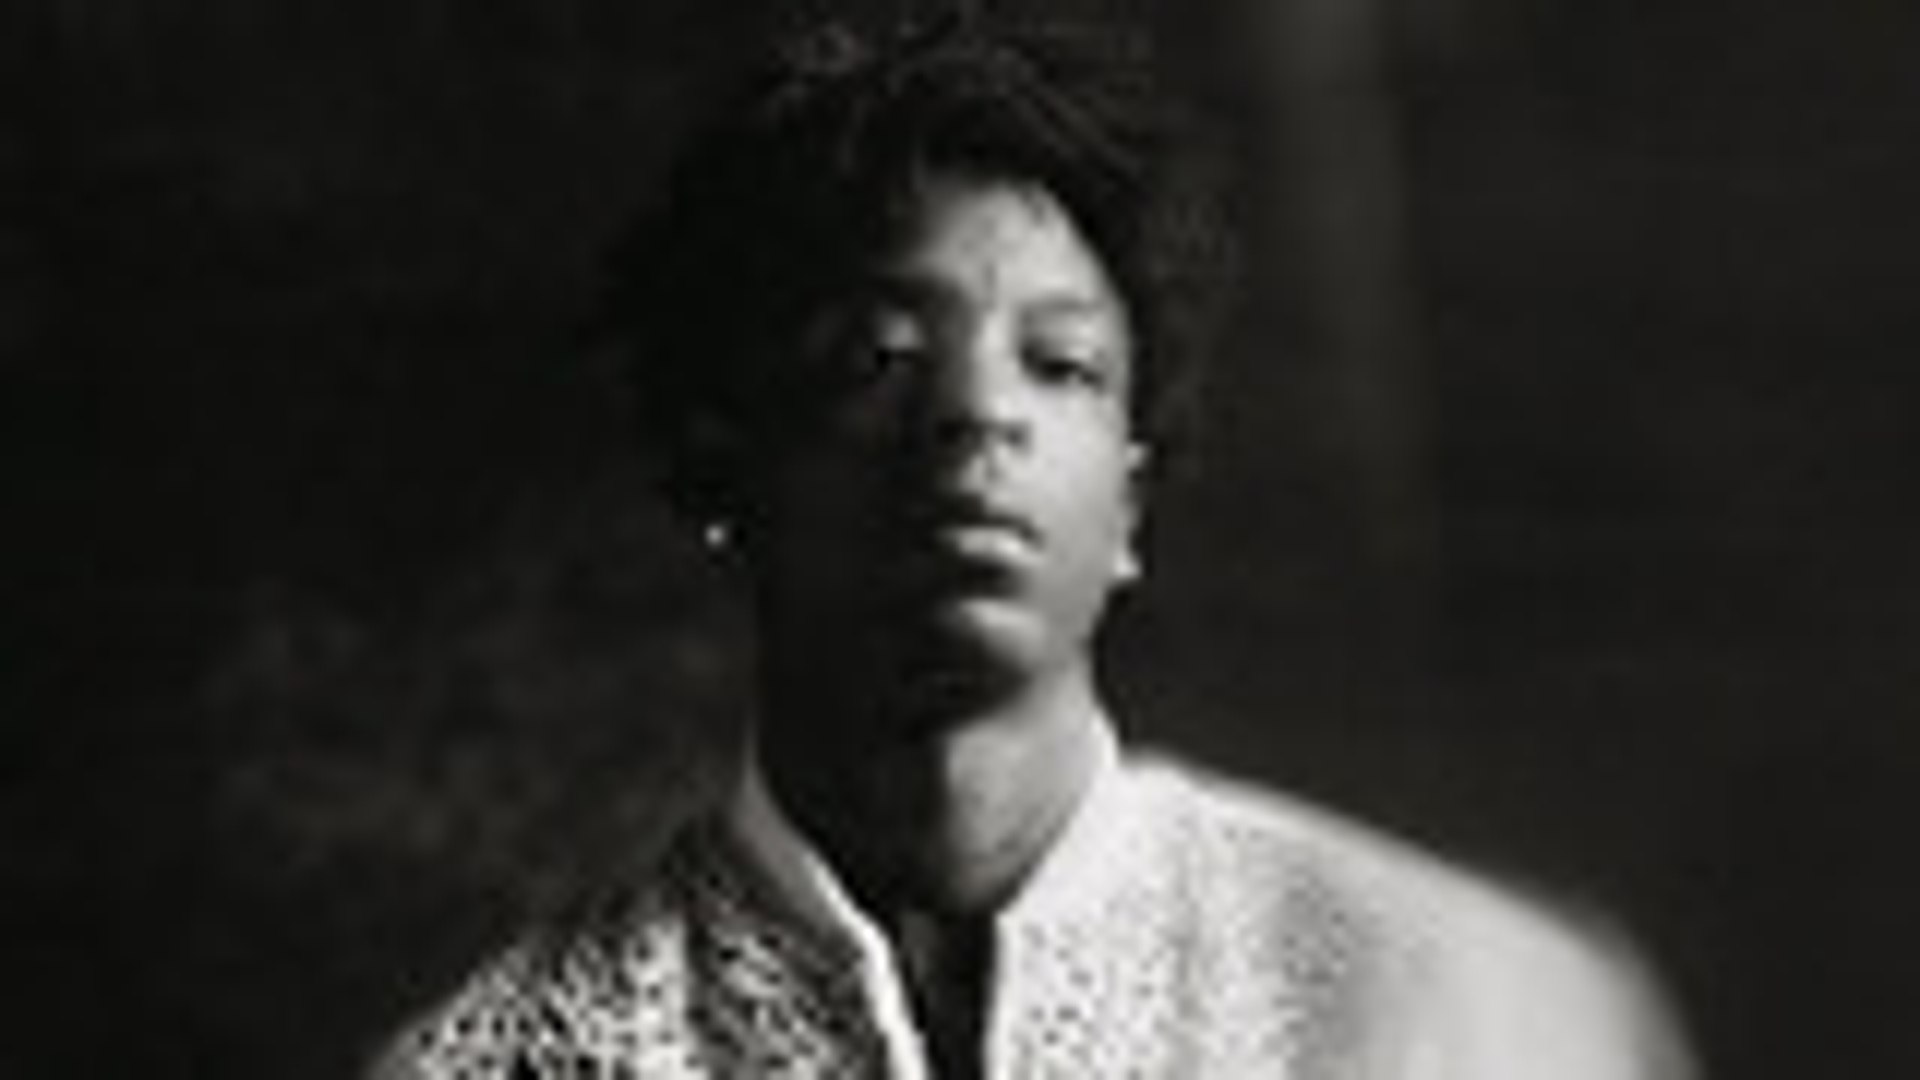 21 Savage Says “It's time” For A New Album - The Source